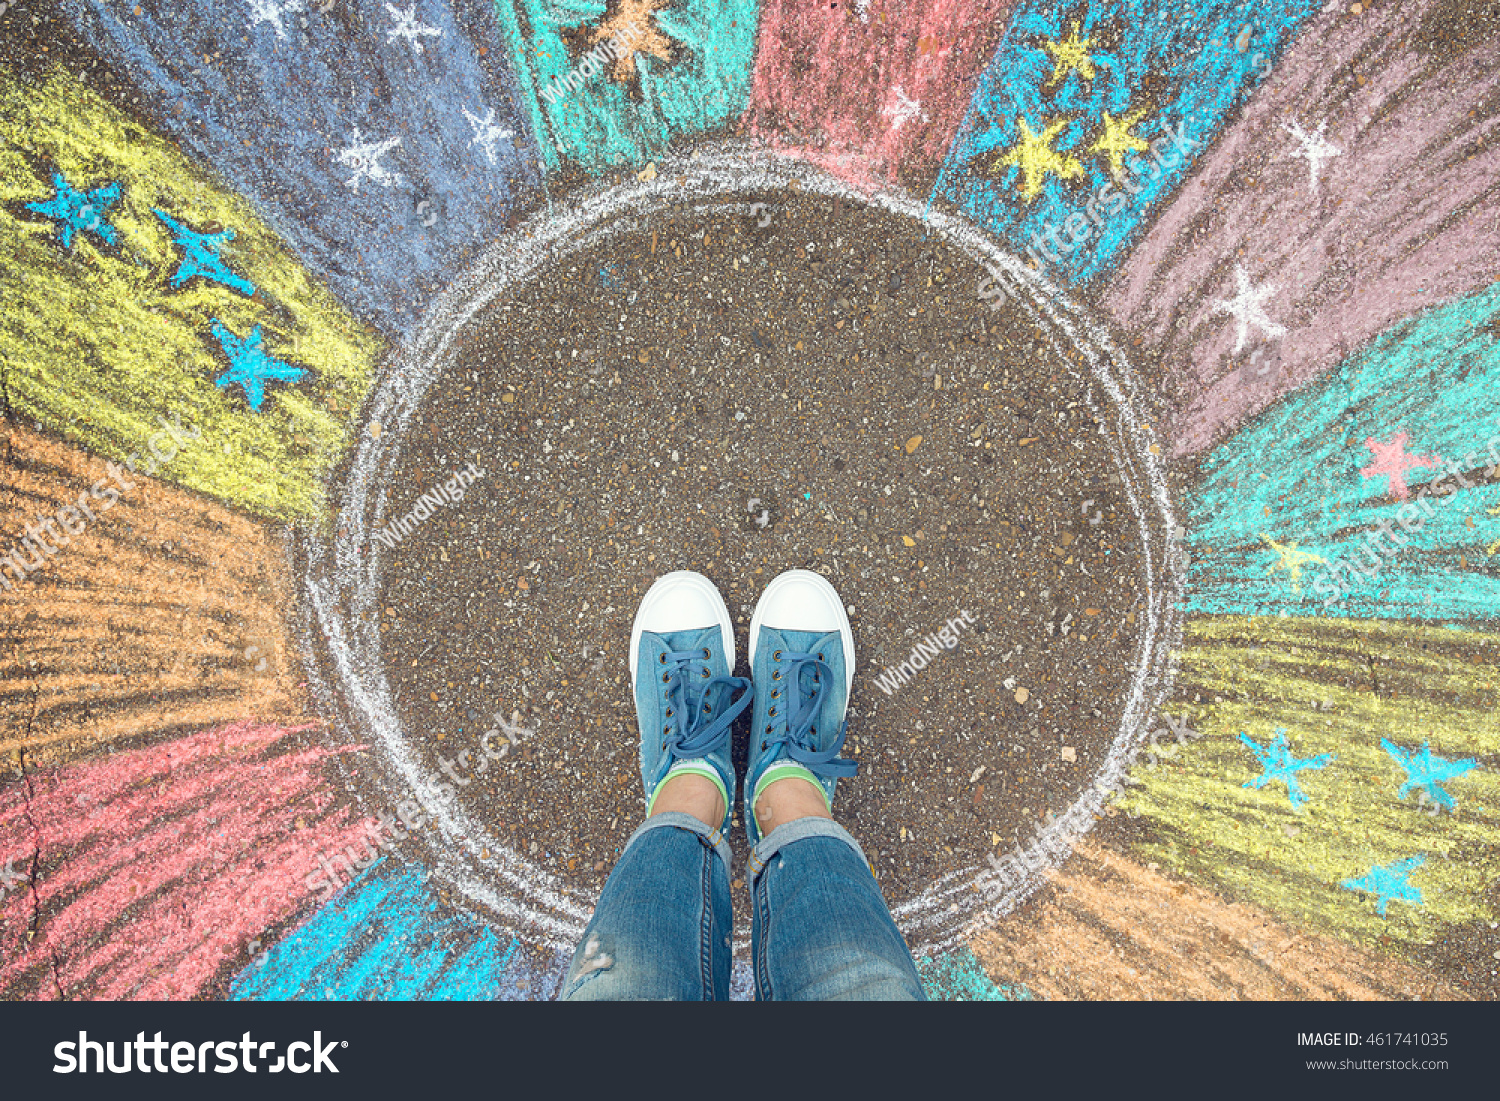 Comfort zone concept. Feet standing inside comfort zone circle surrounded by rainbow stripes painted with chalk on the asphalt. #461741035